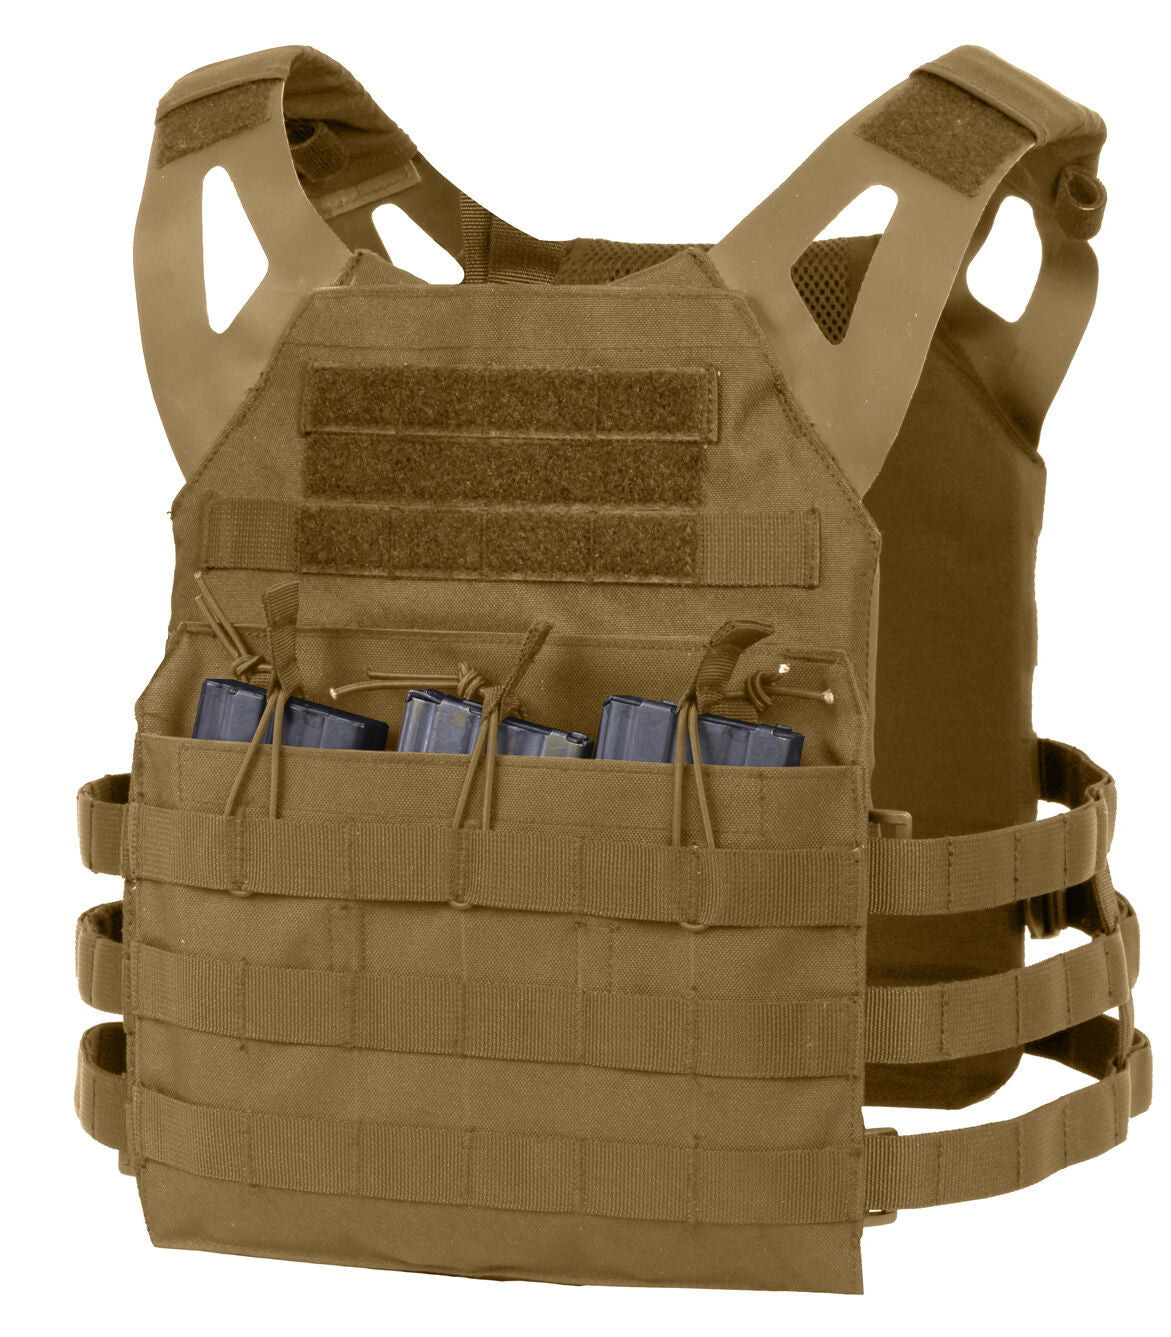 Rothco Lightweight Armor Plate Carrier Vest - Coyote Brown